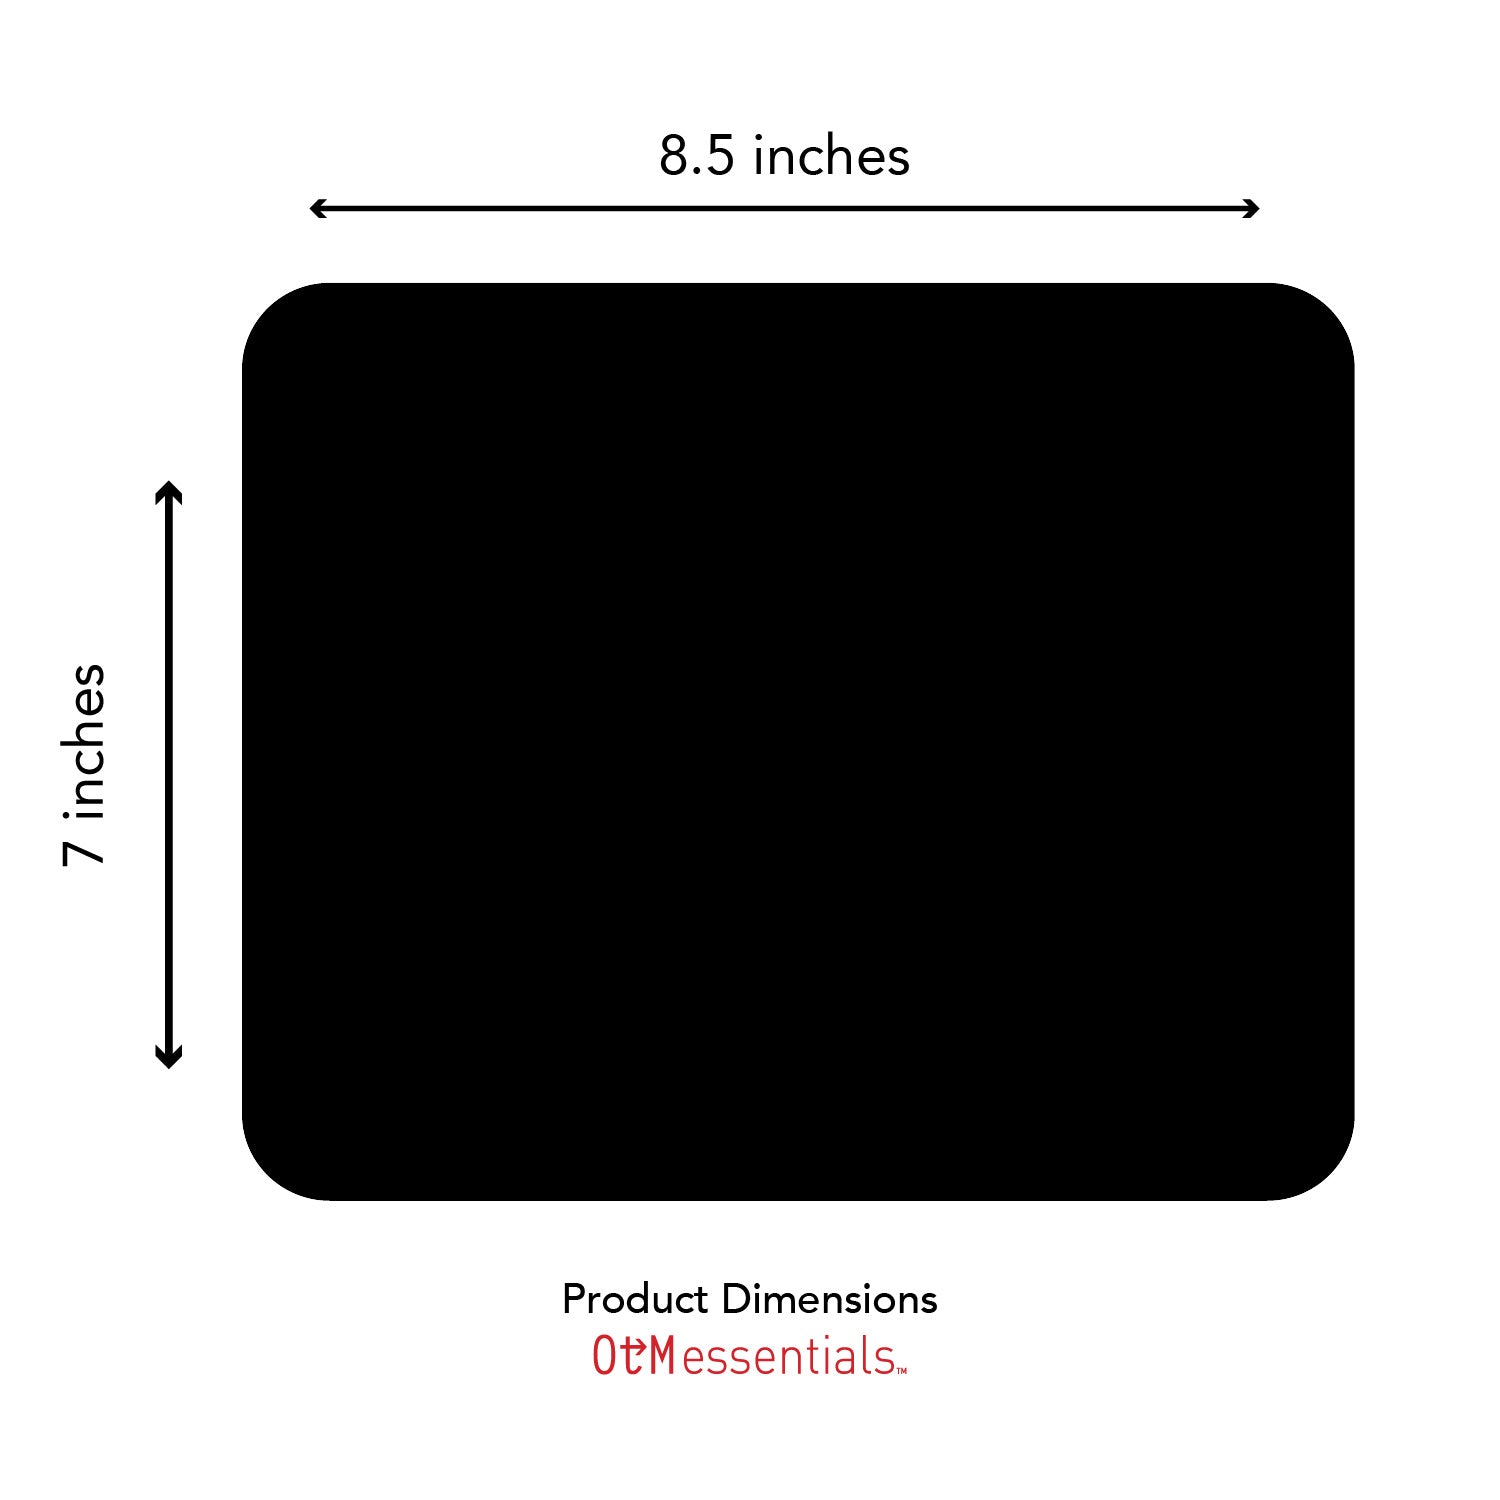 OC-CHR2-MH38A, Product Dimensions